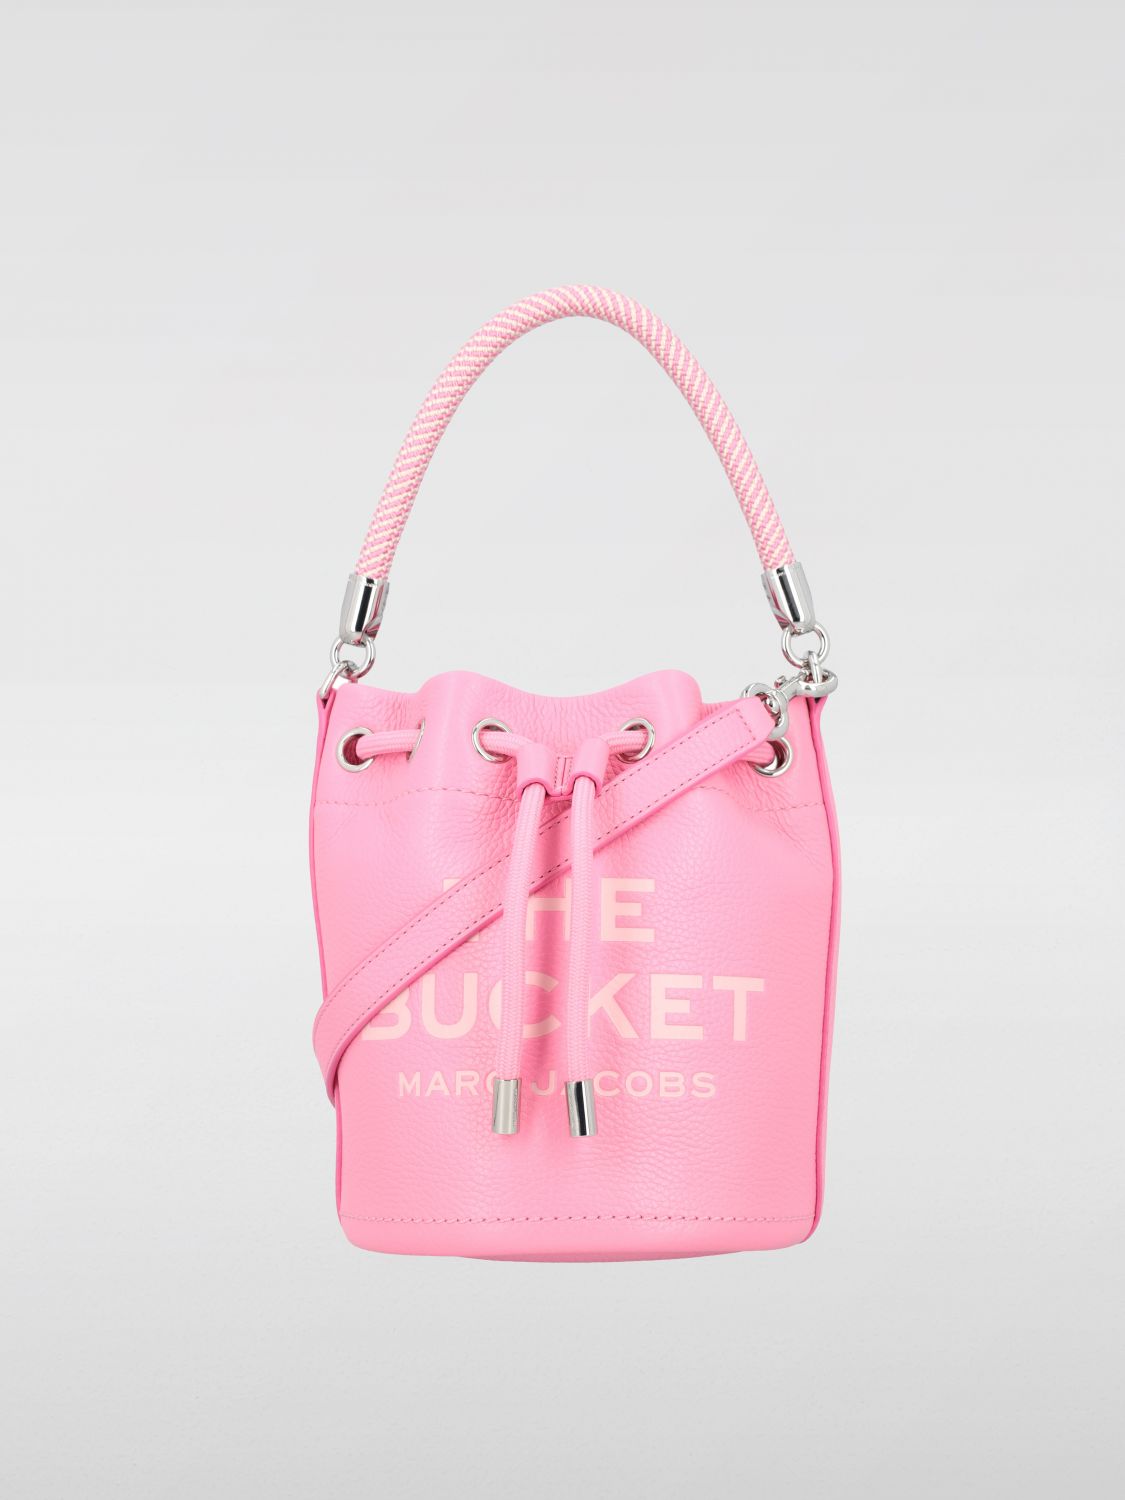 Marc Jacobs Marc Jacobs The Bucket Bag in grained leather